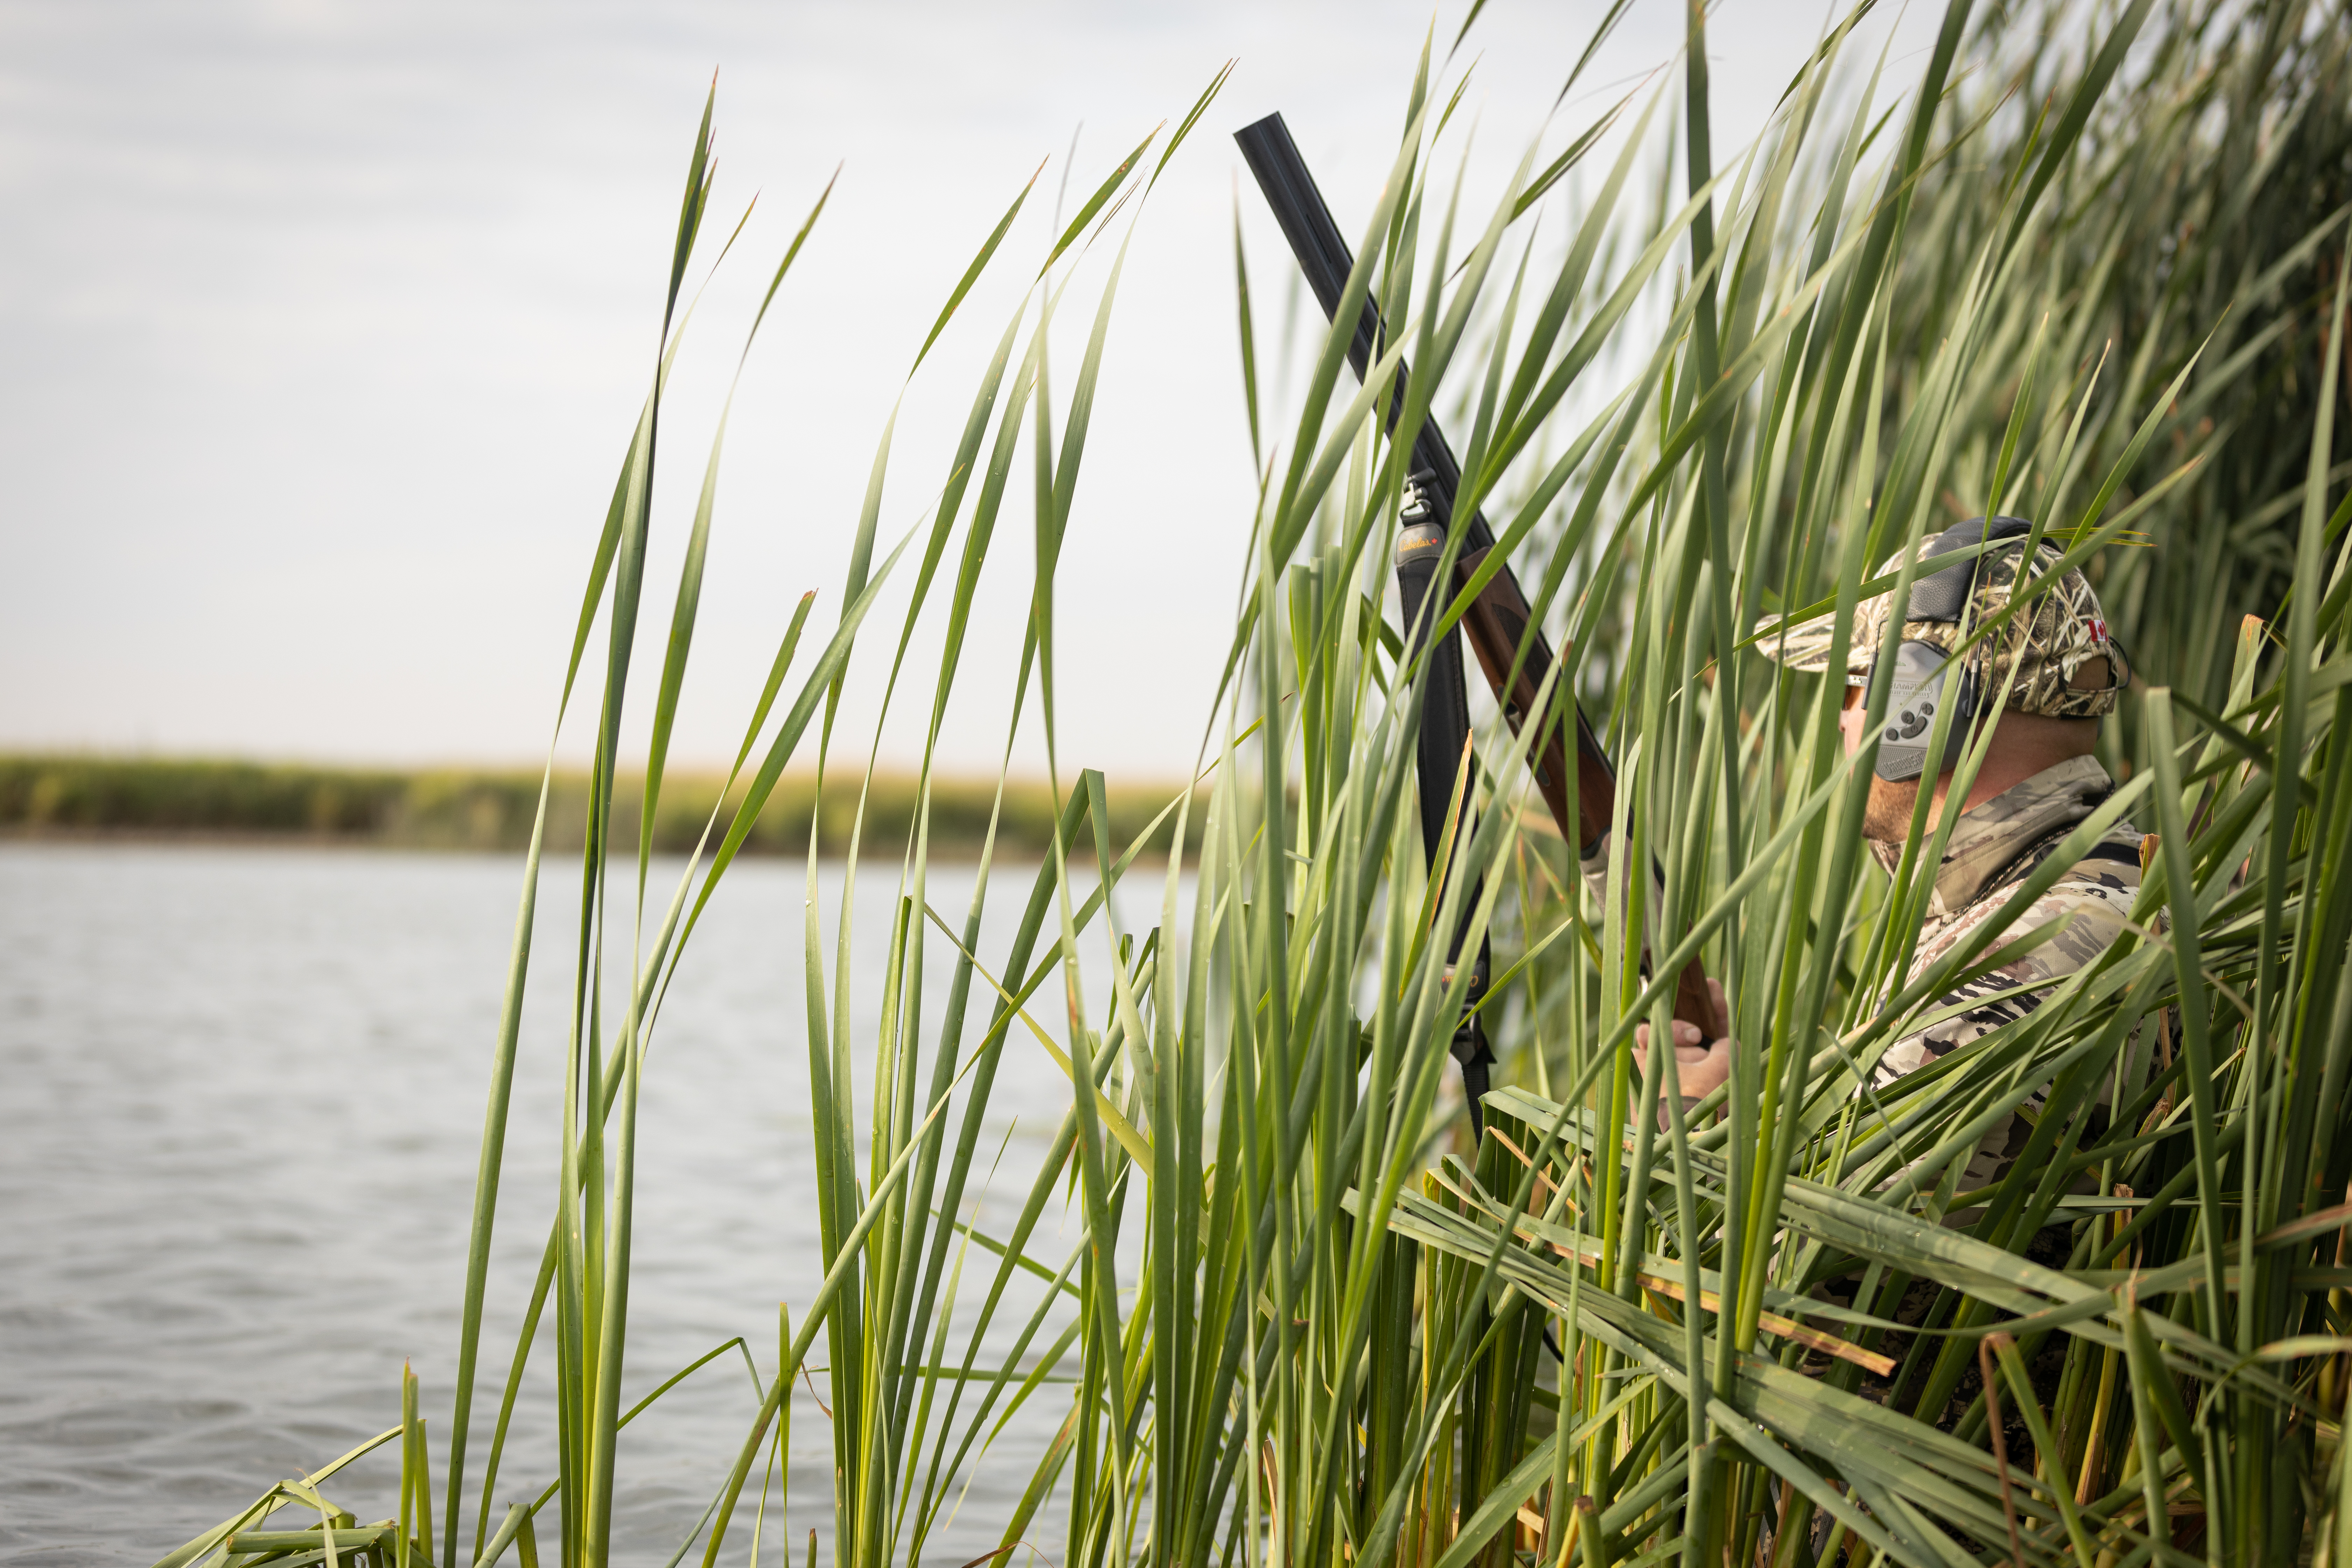 A hunter concealed in the reeds with a hunting rifle, modern waterfowl hunting without a punt gun concept. 